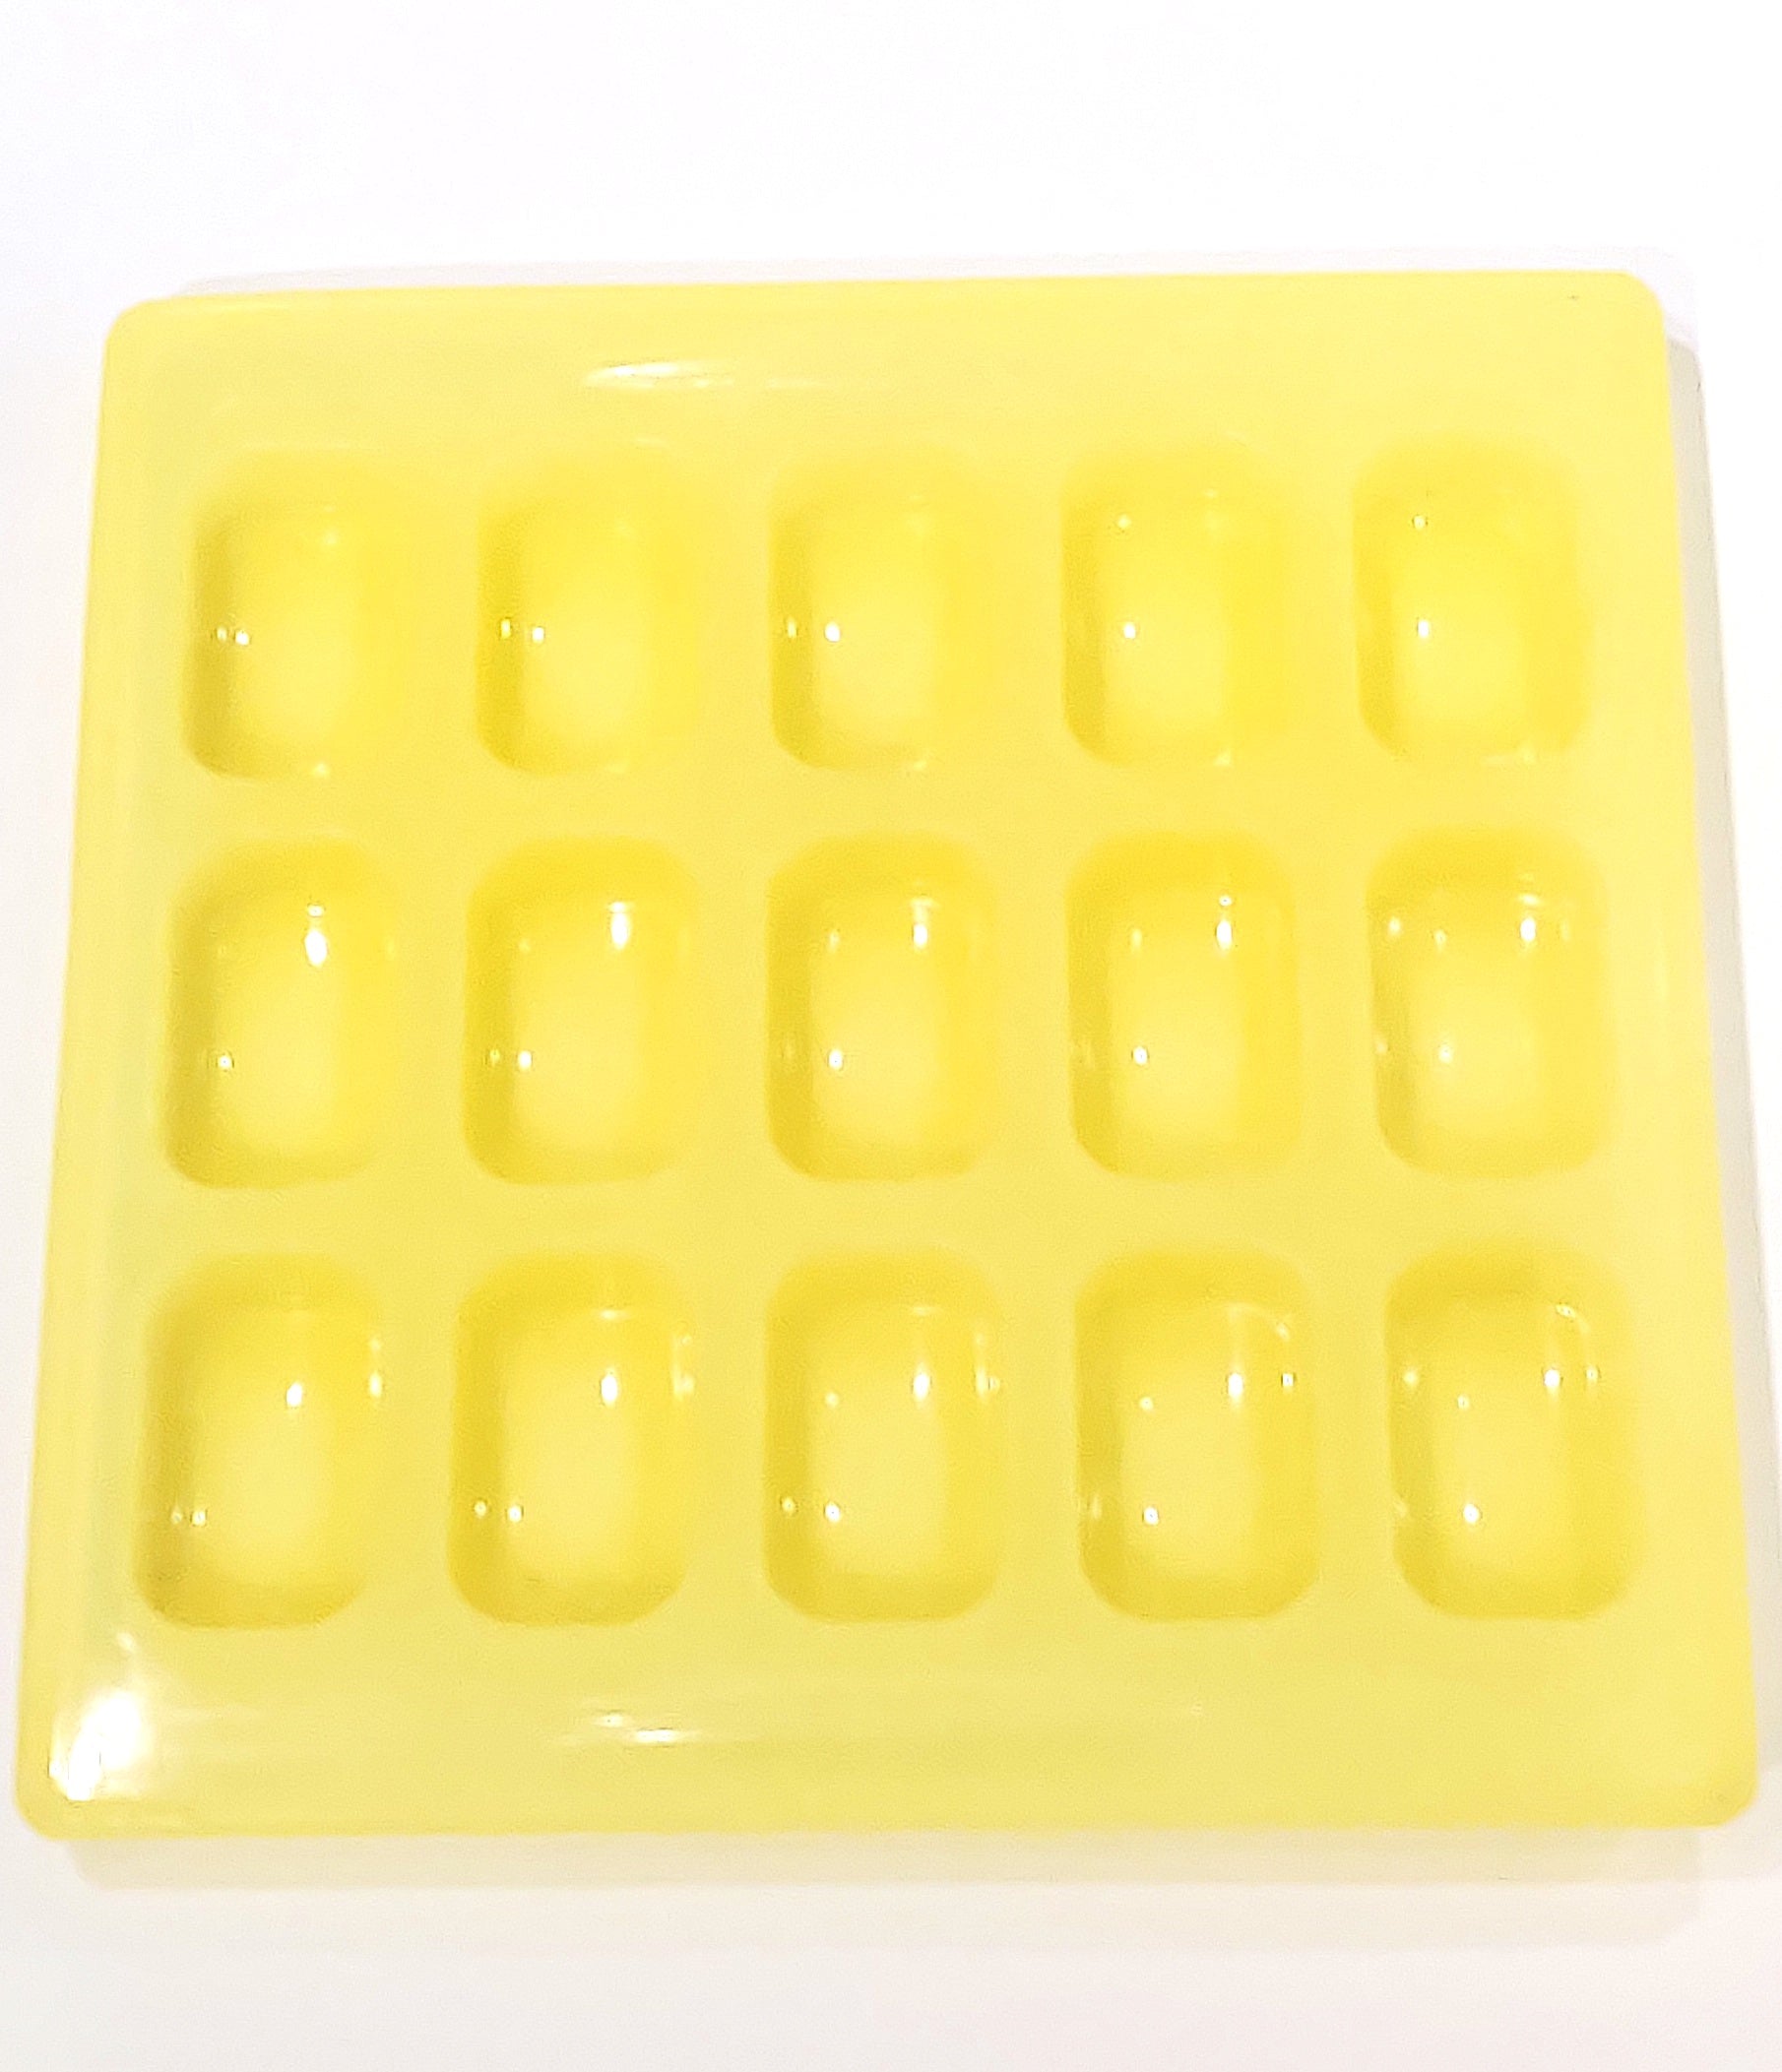 Rounded Rectangle Soap Mould (30gm)